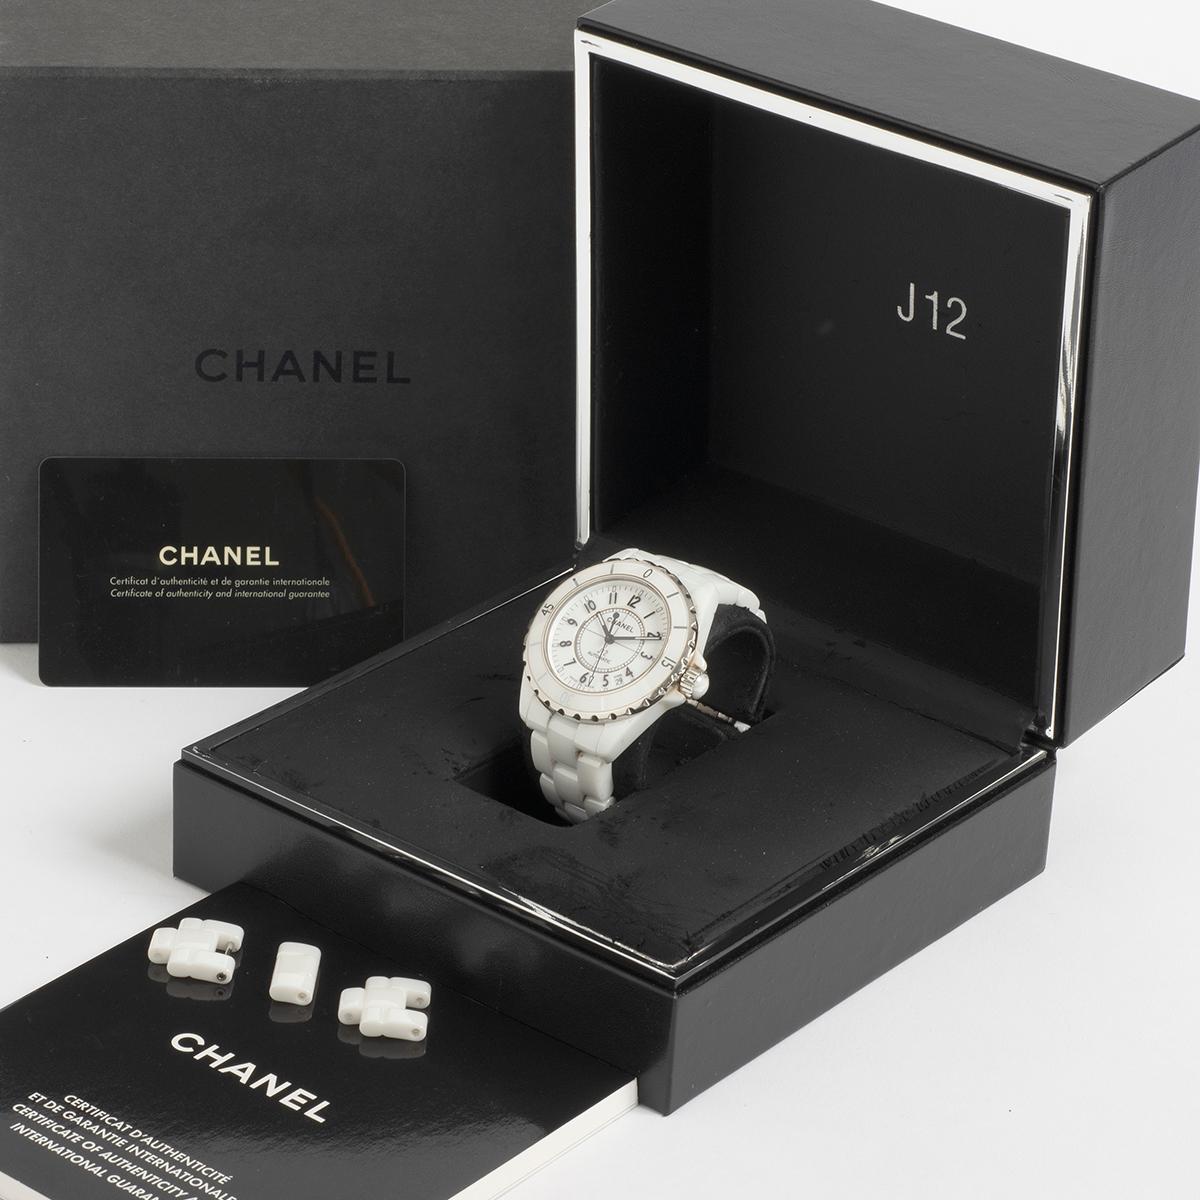 The most desirable of the J12 range, our Chanel Ho970 (CH17387) features a 38mm white ceramic case with white ceramic bracelet and bi folding clasp, powered by an automatic movement, making it ideal for a man or woman. This size and variant has